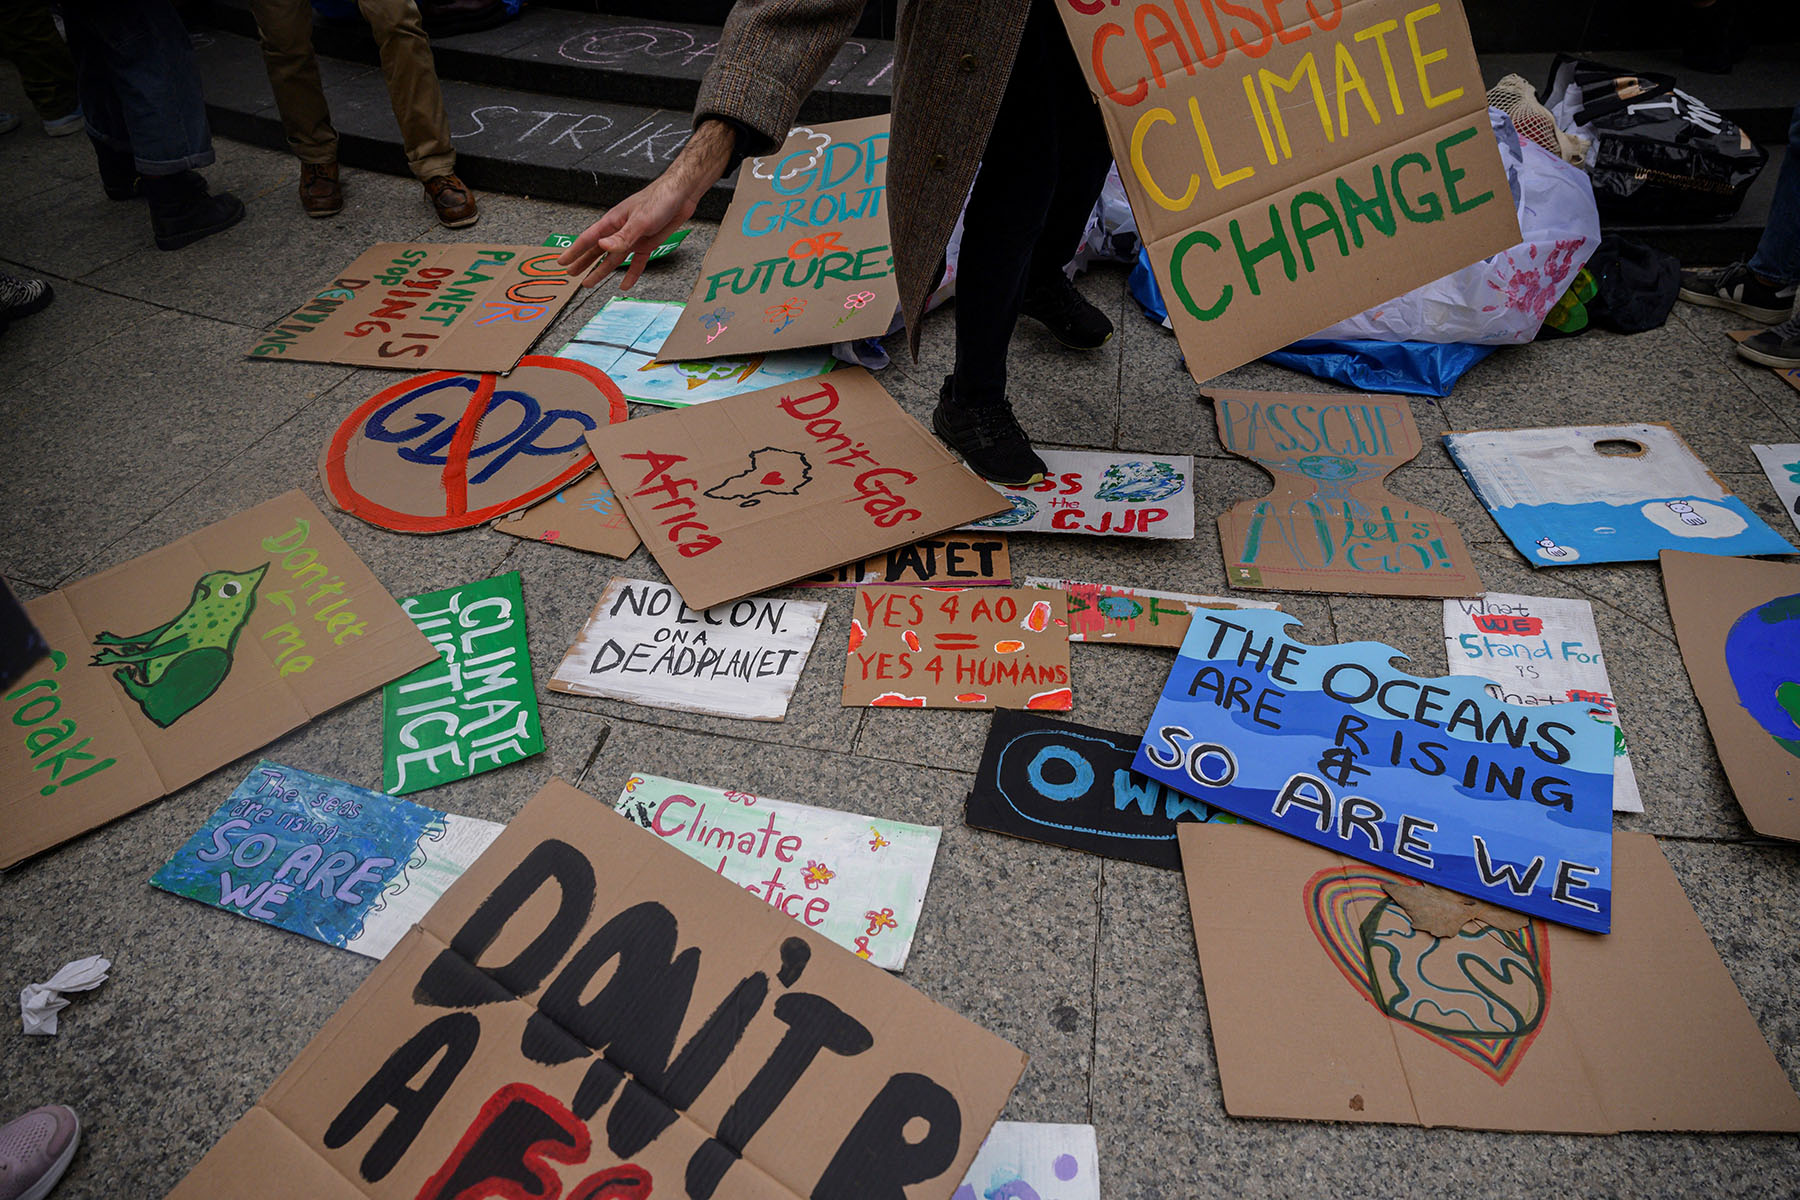 An activist picks up a placard during a Global Climate Strike. Posters are all over the floor and read "The oceans are rising and so are we," "climate justice," "no Econ on a dead planet"